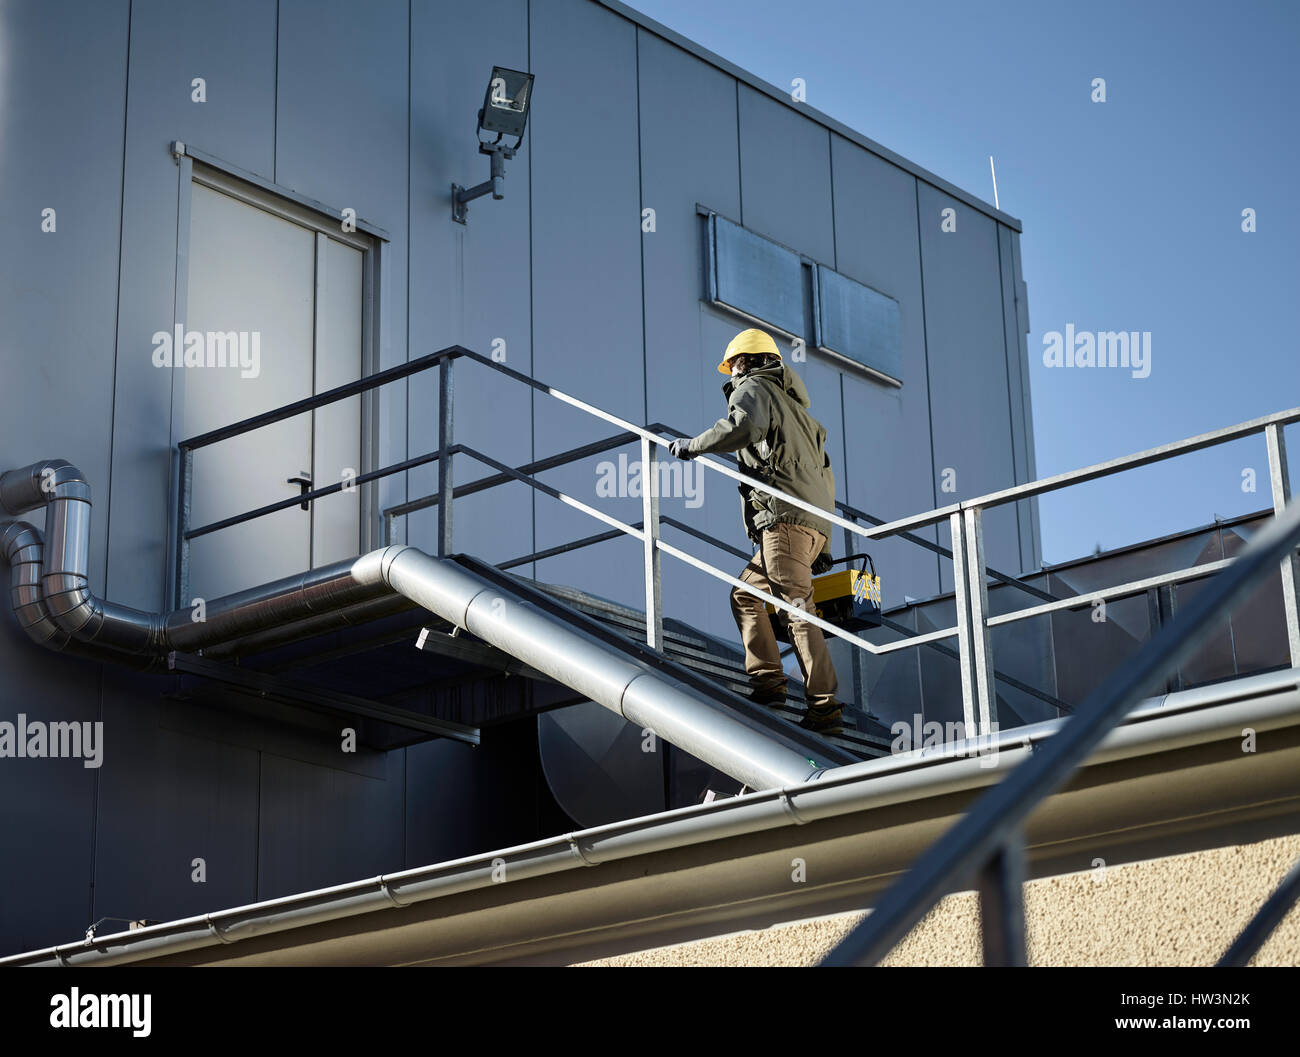 Engineer with yellow helmet and tool box using a staircase to an engine room, Austria Stock Photo